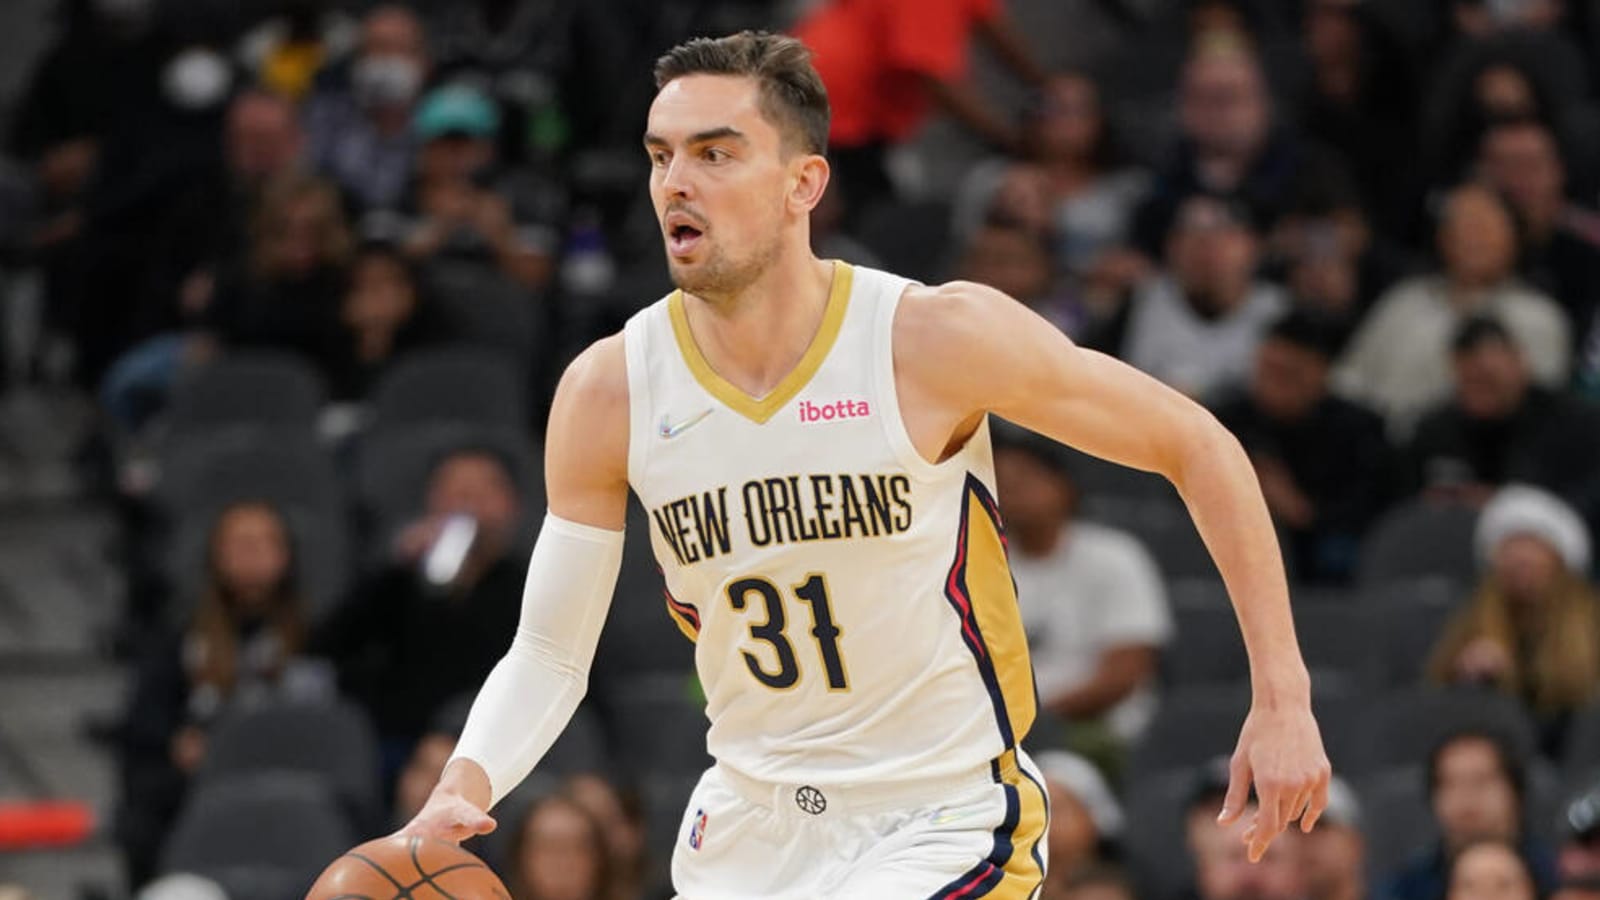 Tomas Satoransky gets buyout from Spurs, will sign with Wizards